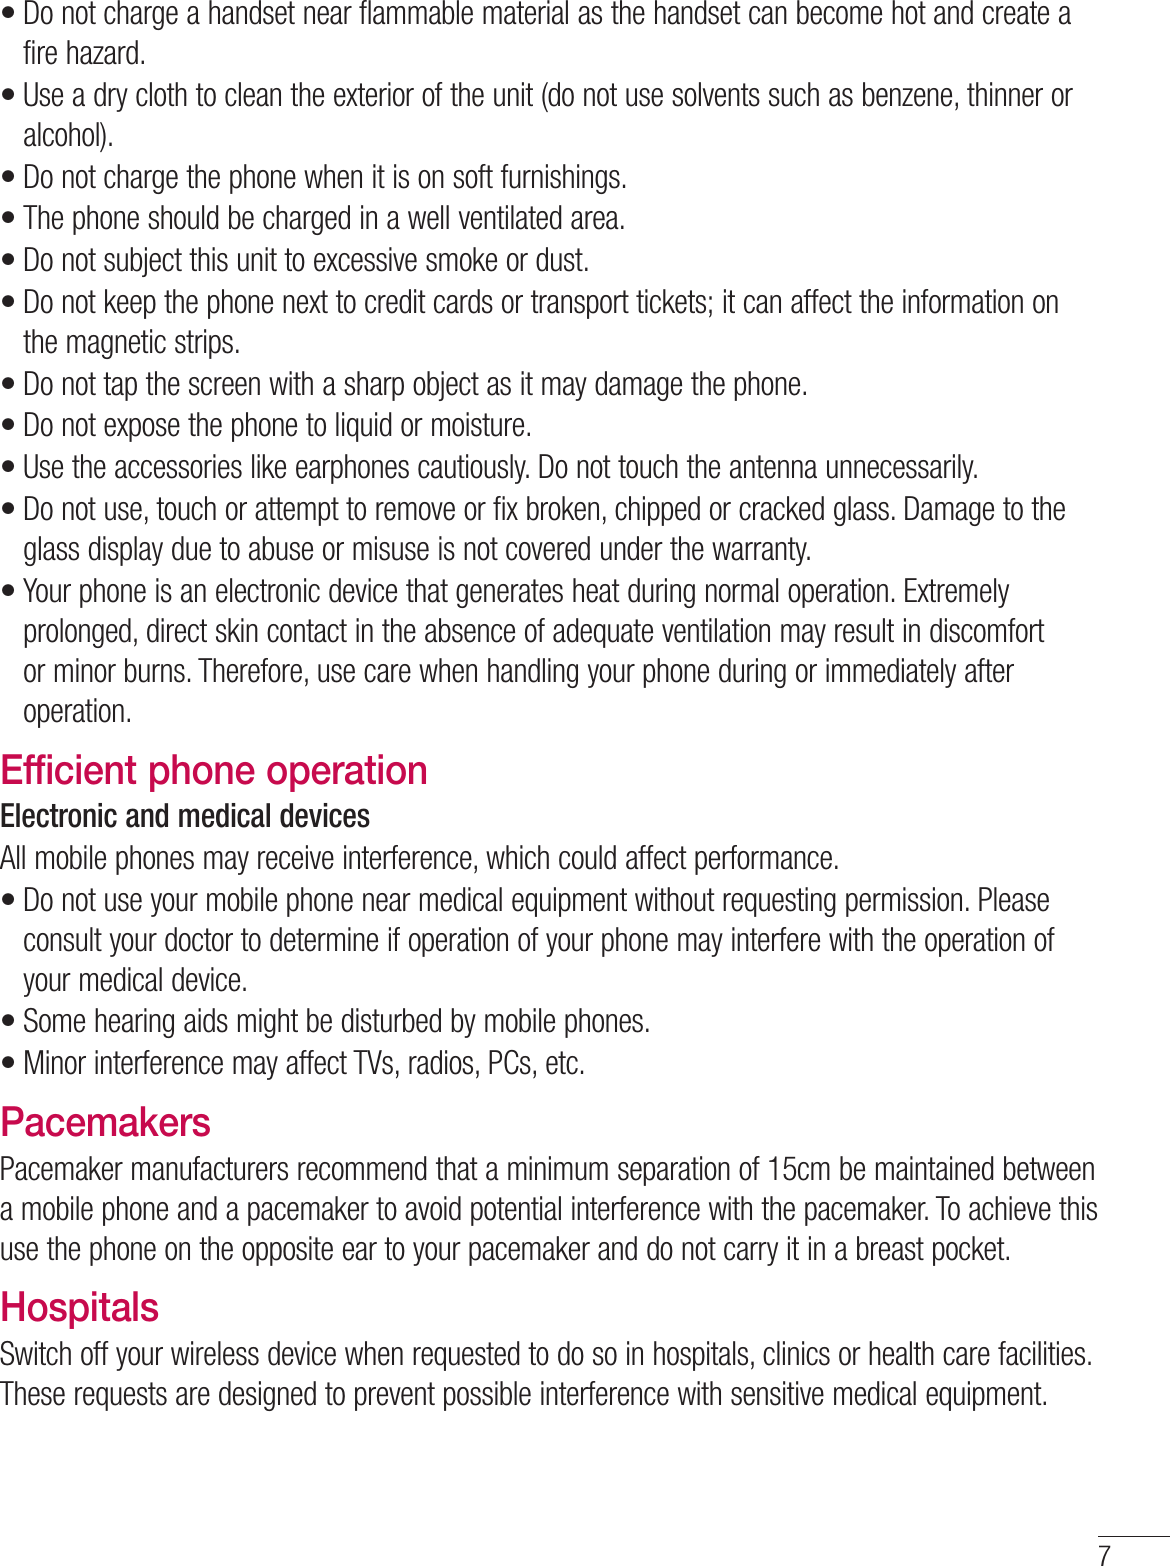 7Do not charge a handset near flammable material as the handset can become hot and create a fire hazard.Use a dry cloth to clean the exterior of the unit (do not use solvents such as benzene, thinner or alcohol).Do not charge the phone when it is on soft furnishings.The phone should be charged in a well ventilated area.Do not subject this unit to excessive smoke or dust.Do not keep the phone next to credit cards or transport tickets; it can affect the information on the magnetic strips.Do not tap the screen with a sharp object as it may damage the phone.Do not expose the phone to liquid or moisture.Use the accessories like earphones cautiously. Do not touch the antenna unnecessarily.Do not use, touch or attempt to remove or fix broken, chipped or cracked glass. Damage to the glass display due to abuse or misuse is not covered under the warranty.Your phone is an electronic device that generates heat during normal operation. Extremely prolonged, direct skin contact in the absence of adequate ventilation may result in discomfort or minor burns. Therefore, use care when handling your phone during or immediately after operation.Efficient phone operationElectronic and medical devicesAll mobile phones may receive interference, which could affect performance.Do not use your mobile phone near medical equipment without requesting permission. Please consult your doctor to determine if operation of your phone may interfere with the operation of your medical device.Some hearing aids might be disturbed by mobile phones.Minor interference may affect TVs, radios, PCs, etc.PacemakersPacemaker manufacturers recommend that a minimum separation of 15cm be maintained between a mobile phone and a pacemaker to avoid potential interference with the pacemaker. To achieve this use the phone on the opposite ear to your pacemaker and do not carry it in a breast pocket.HospitalsSwitch off your wireless device when requested to do so in hospitals, clinics or health care facilities. These requests are designed to prevent possible interference with sensitive medical equipment.••••••••••••••